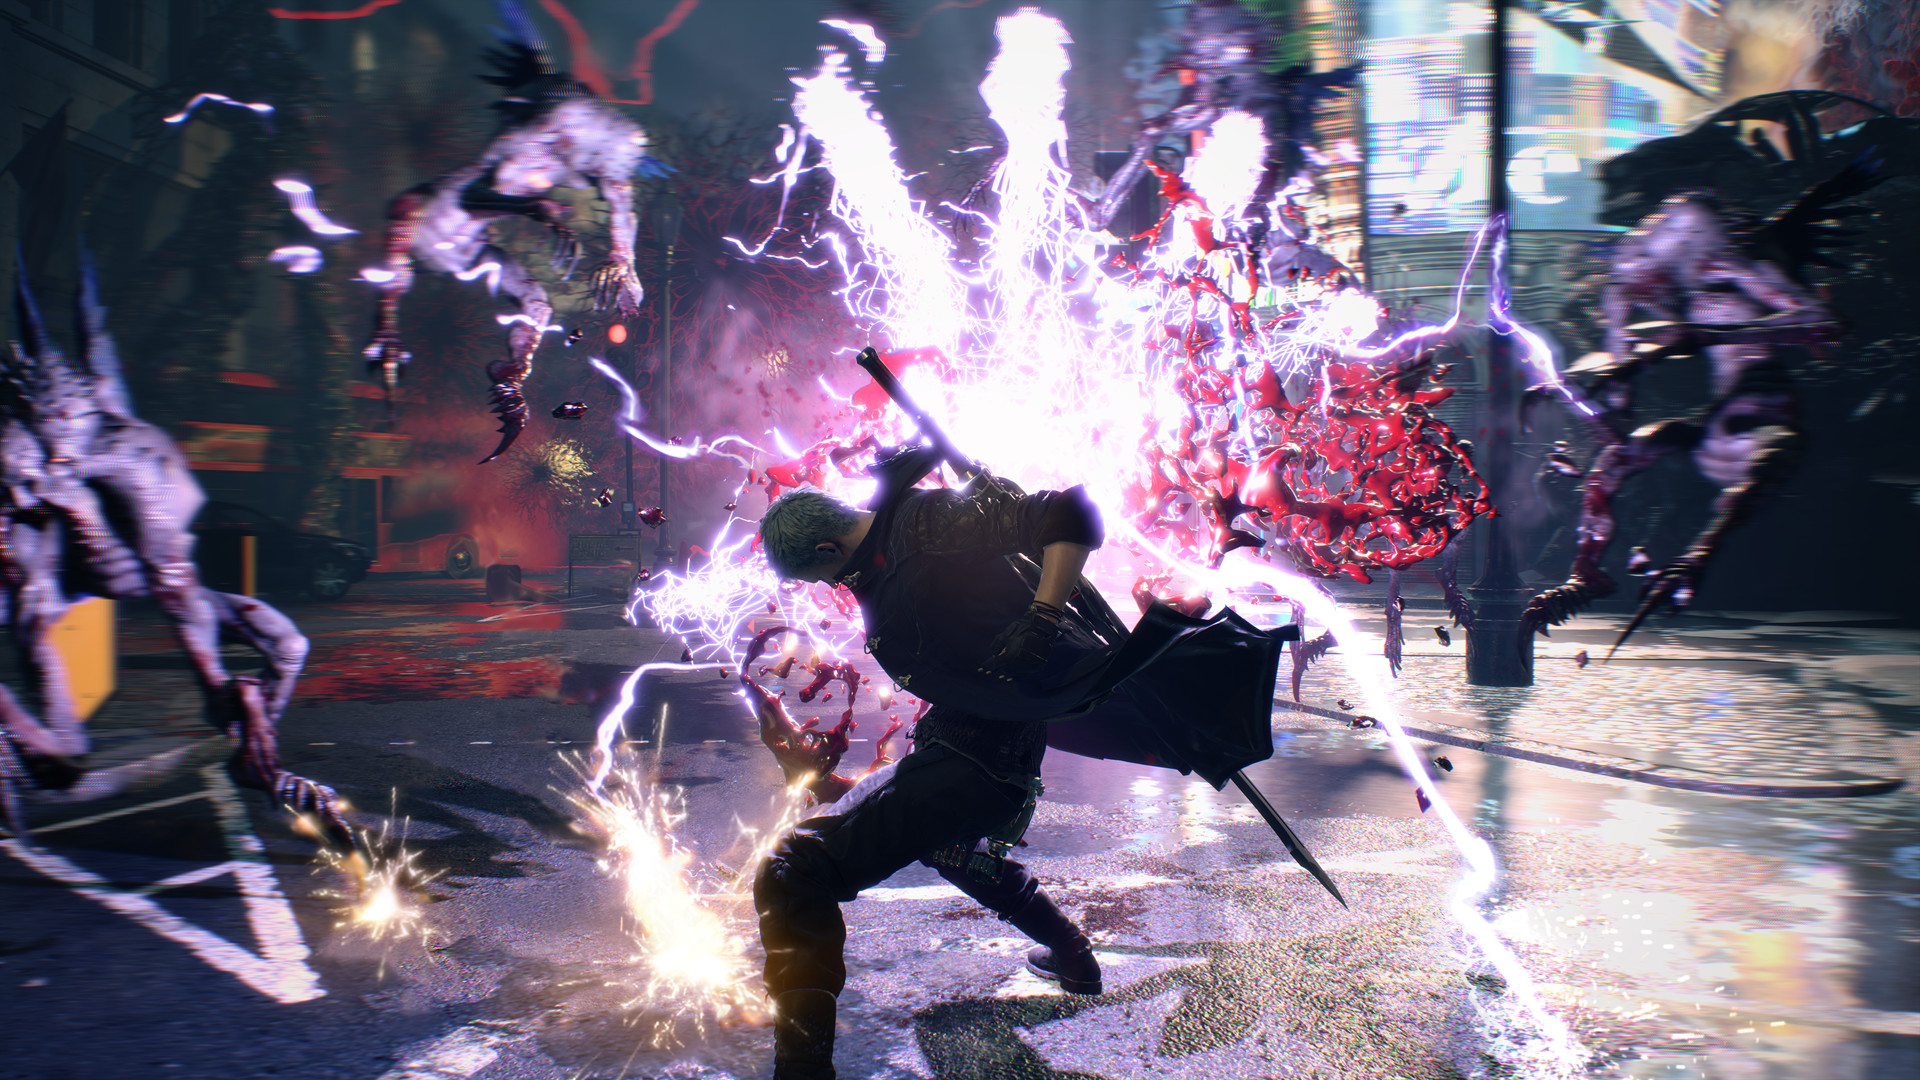 Comprar Devil May Cry 5 Deluxe + Vergil Steam